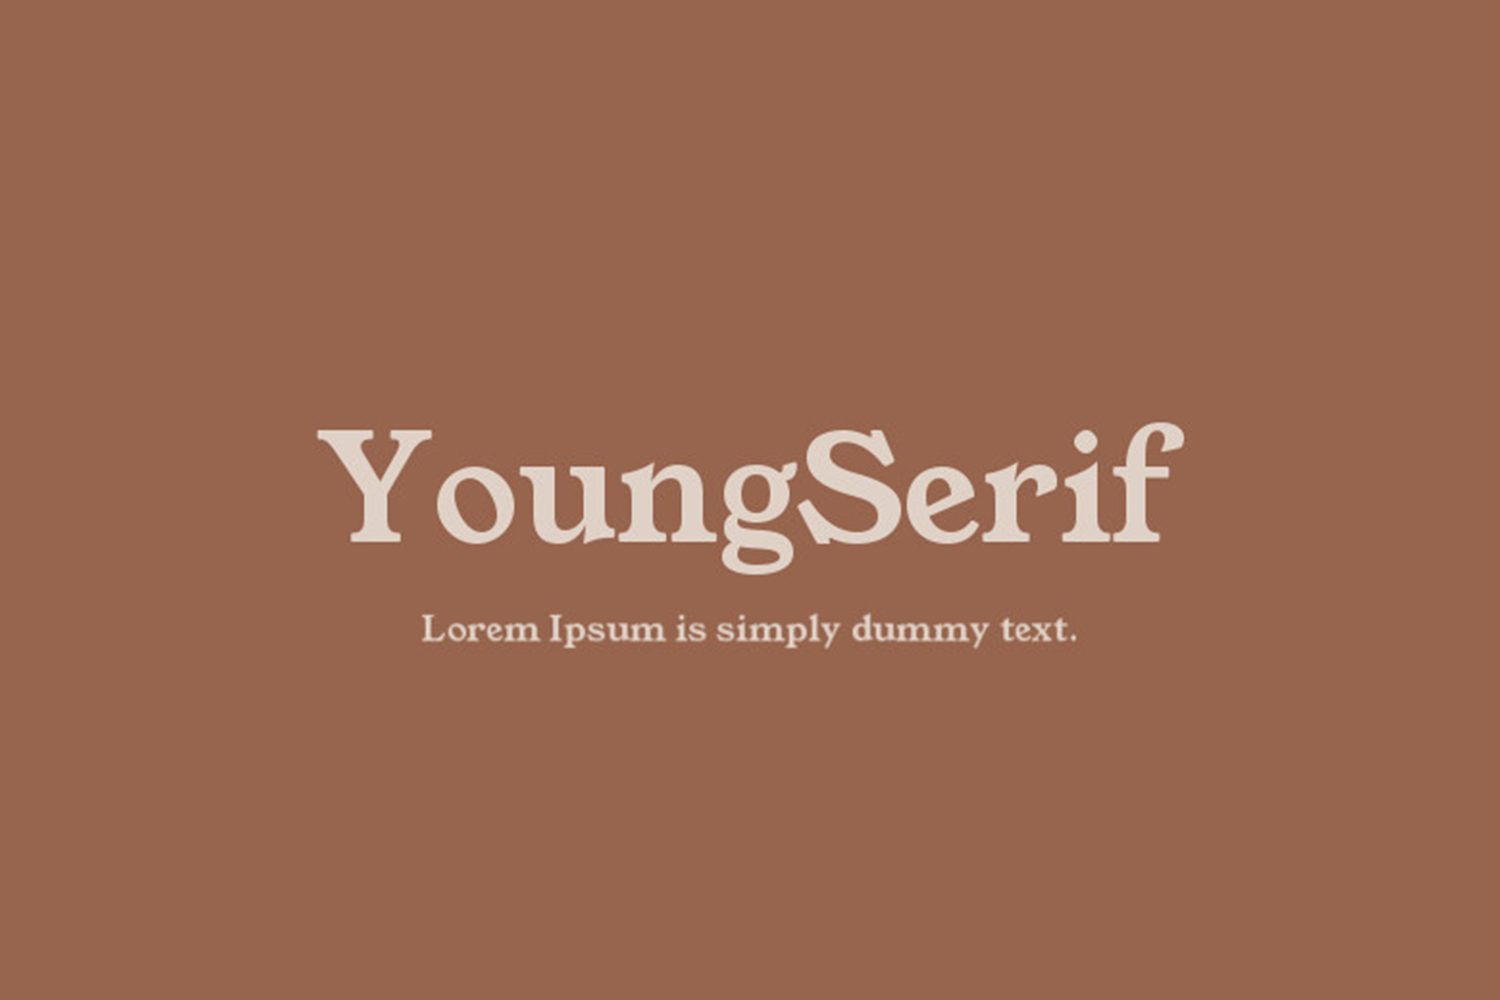 YoungSerif